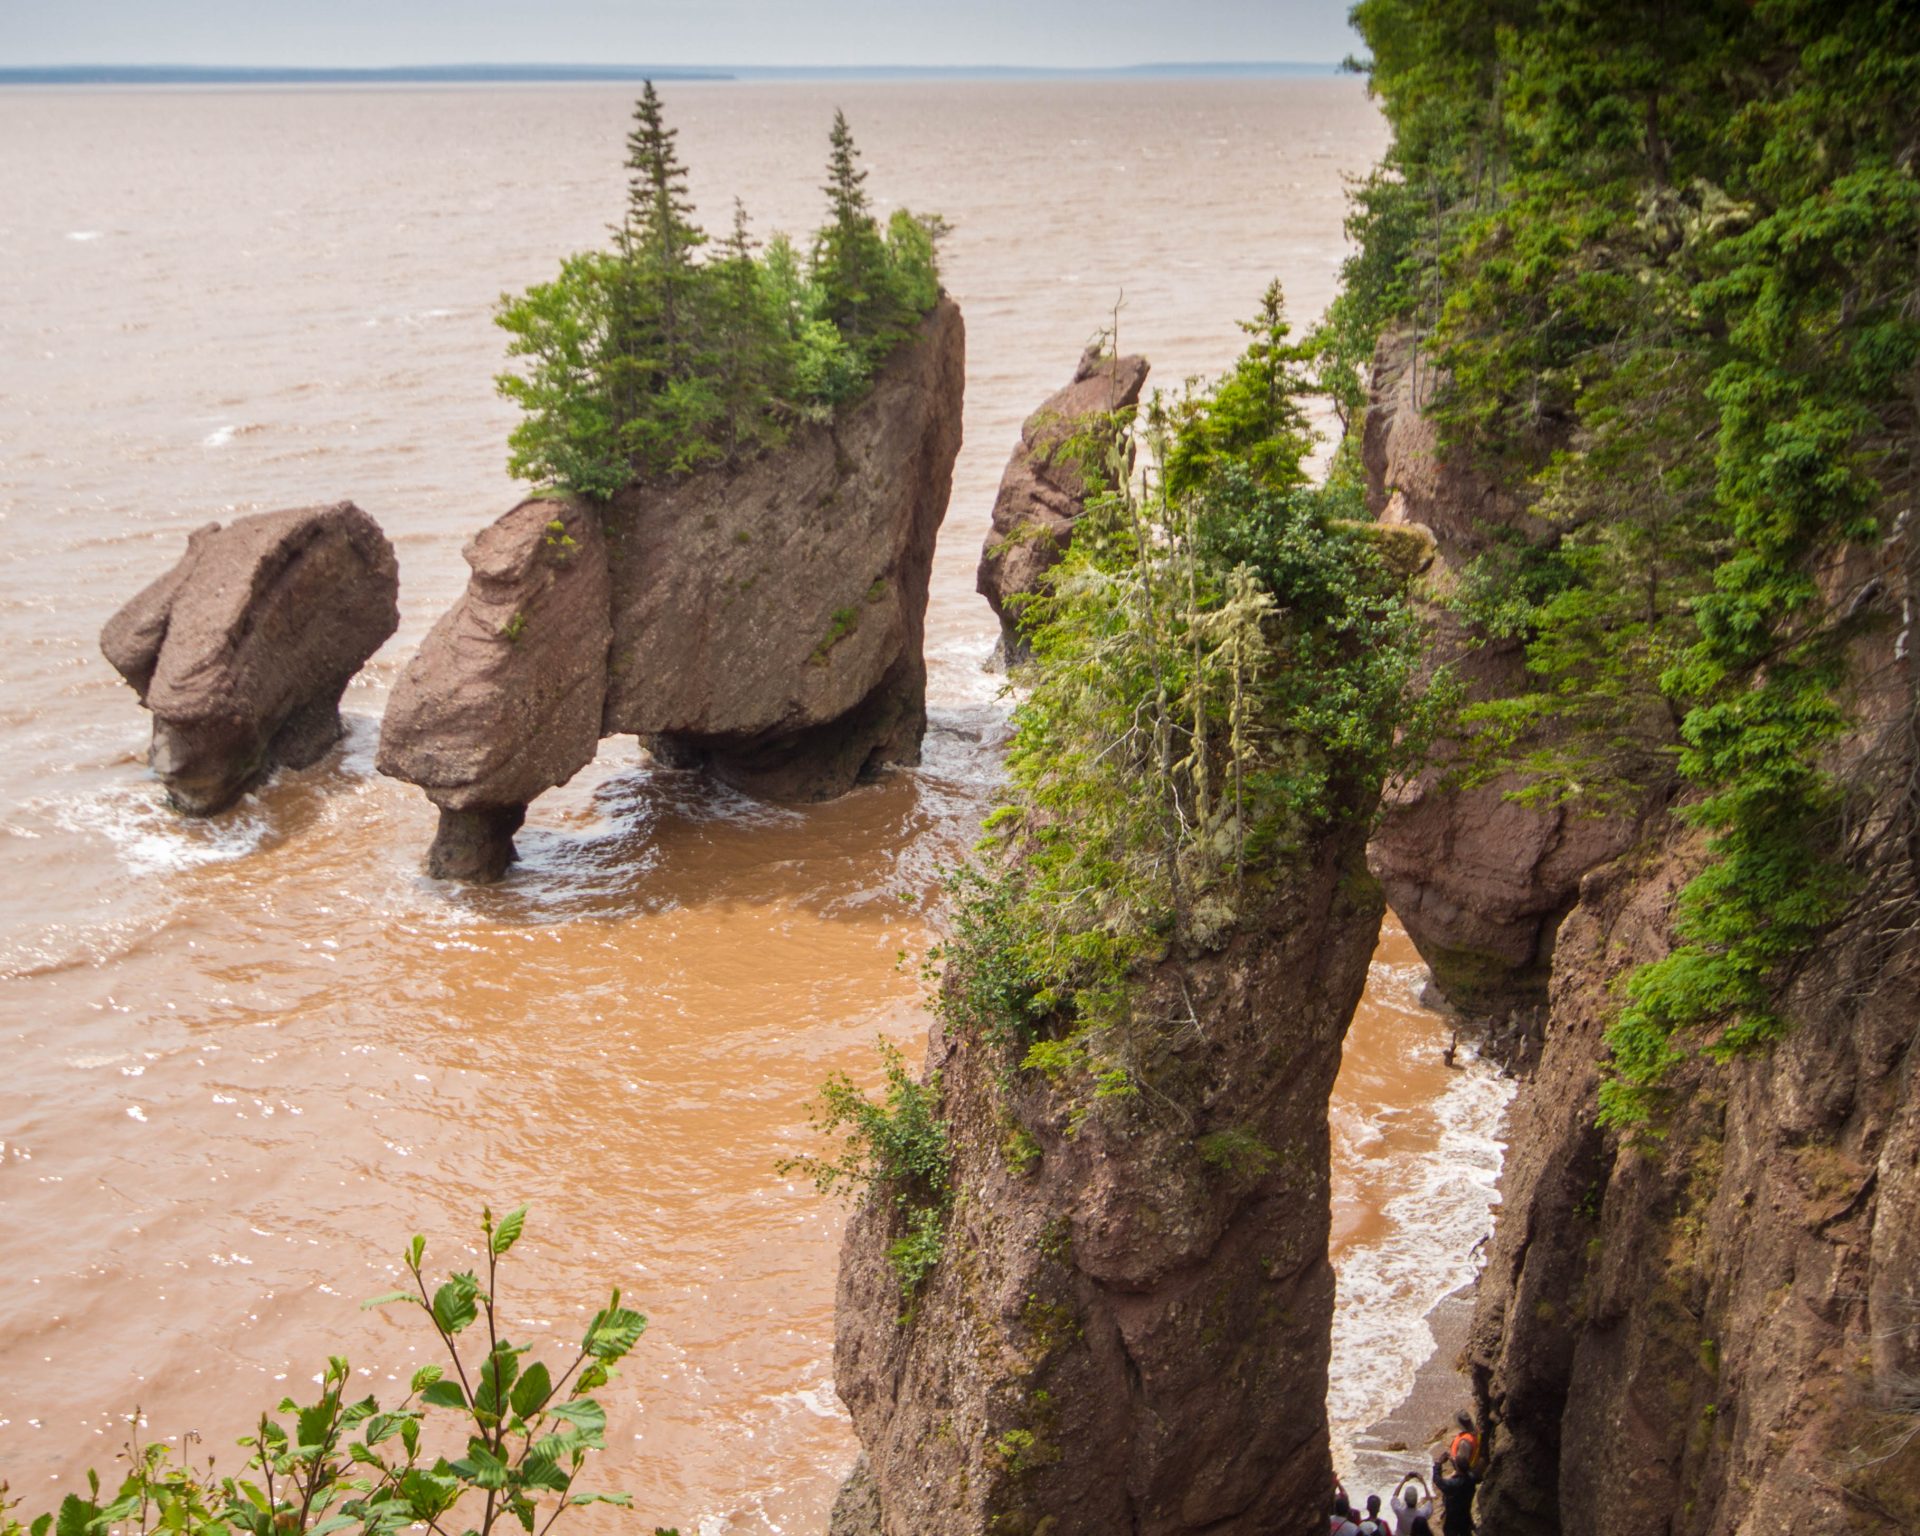 View of Hopewell Rocks from above during high tide.